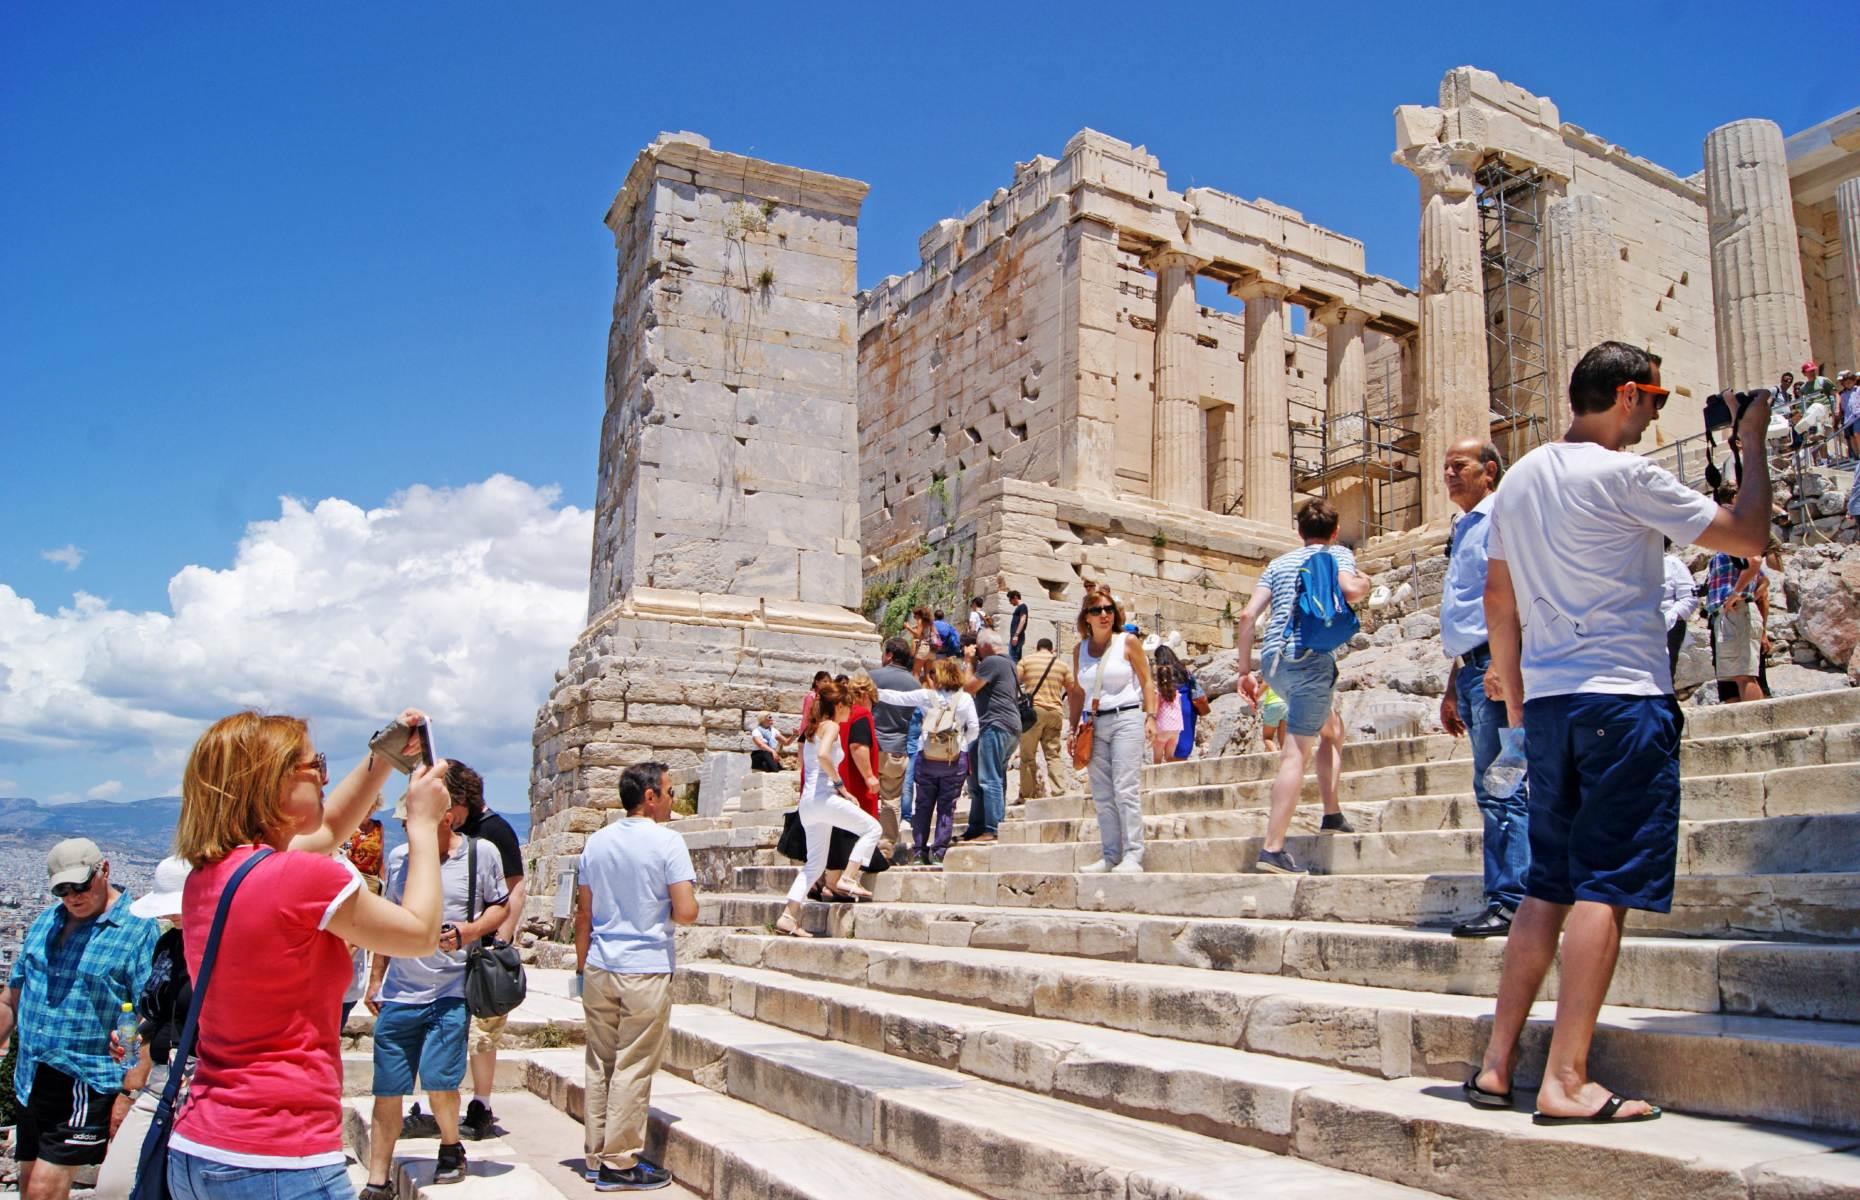 <p>Greece became the latest European country to impose visitor limits on one of its foremost attractions in 2023 when the Acropolis of Athens began capping the number of daily tourists at 20,000. To protect the longevity of the ancient UNESCO site and the comfort of everyone who wants to see it, visitors must book a one-hour entrance slot in advance.</p>  <p>Elsewhere, tourism caps have also been applied on hire cars touring Italy’s Amalfi Coast Drive at busy periods – if your number plate ends in an odd number, you can’t access the road on odd-numbered days, and vice versa.</p>